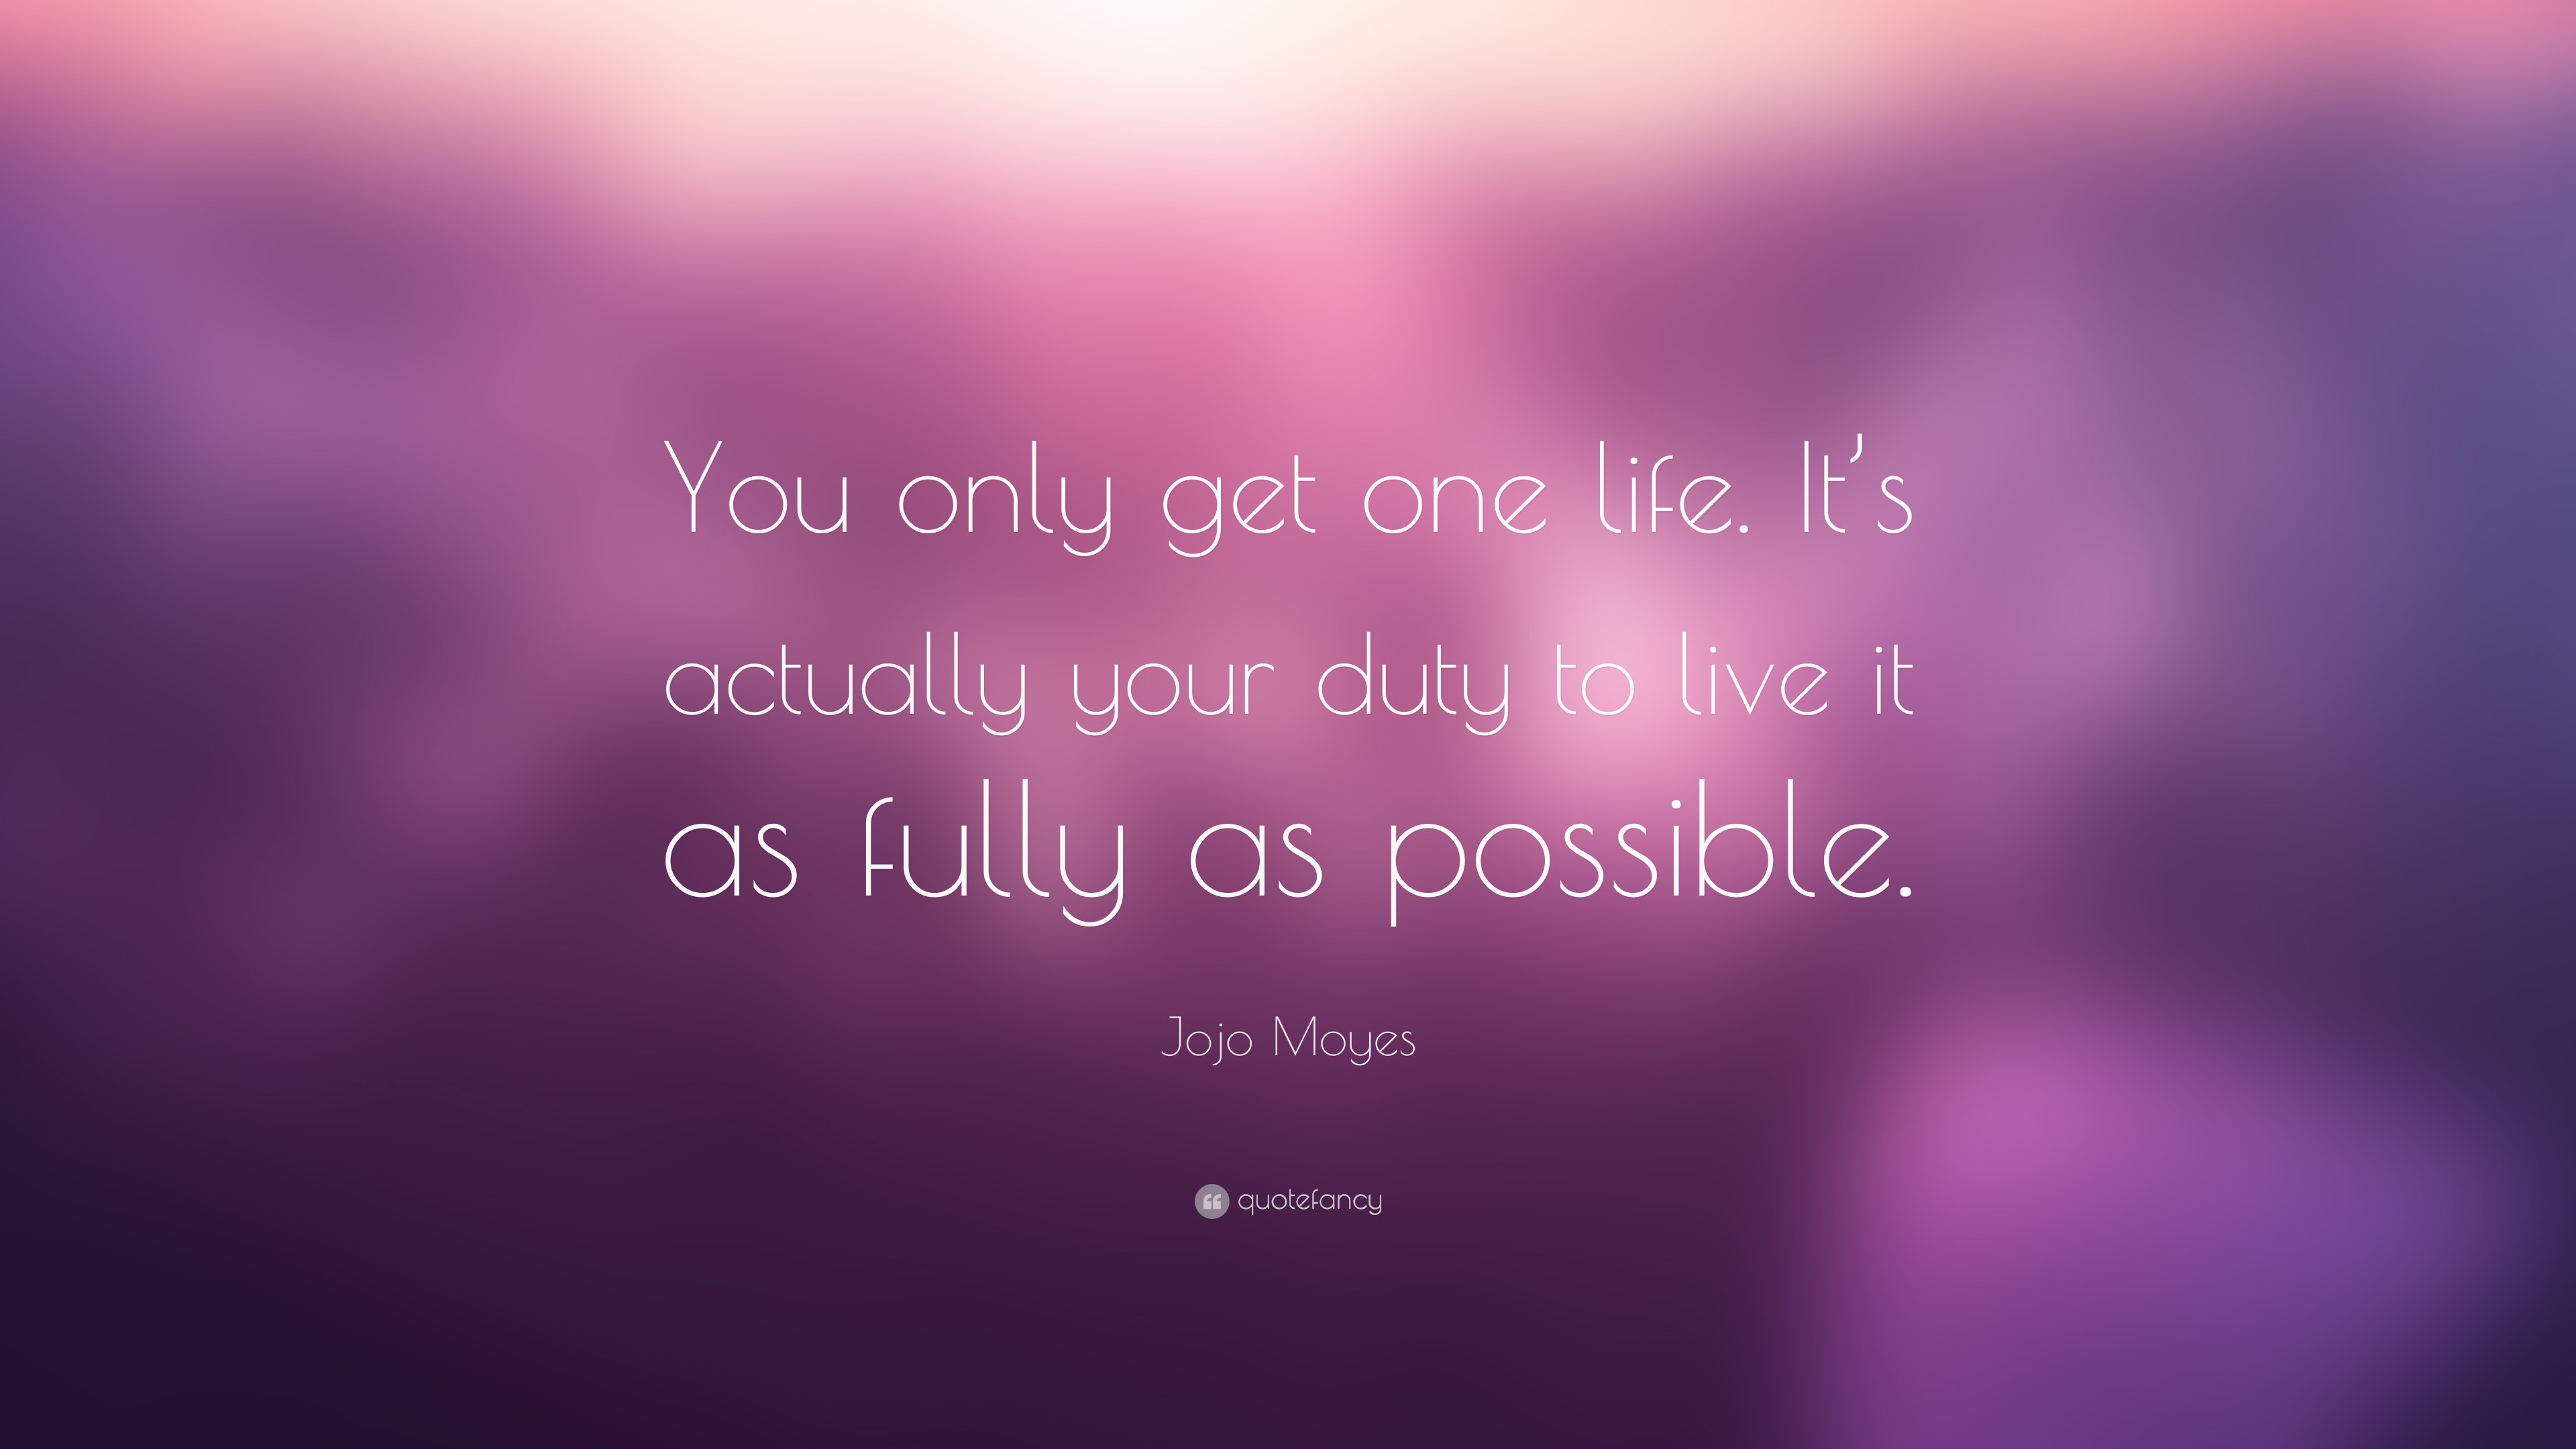 Jojo Moyes Quote “You only one life It s actually your duty to